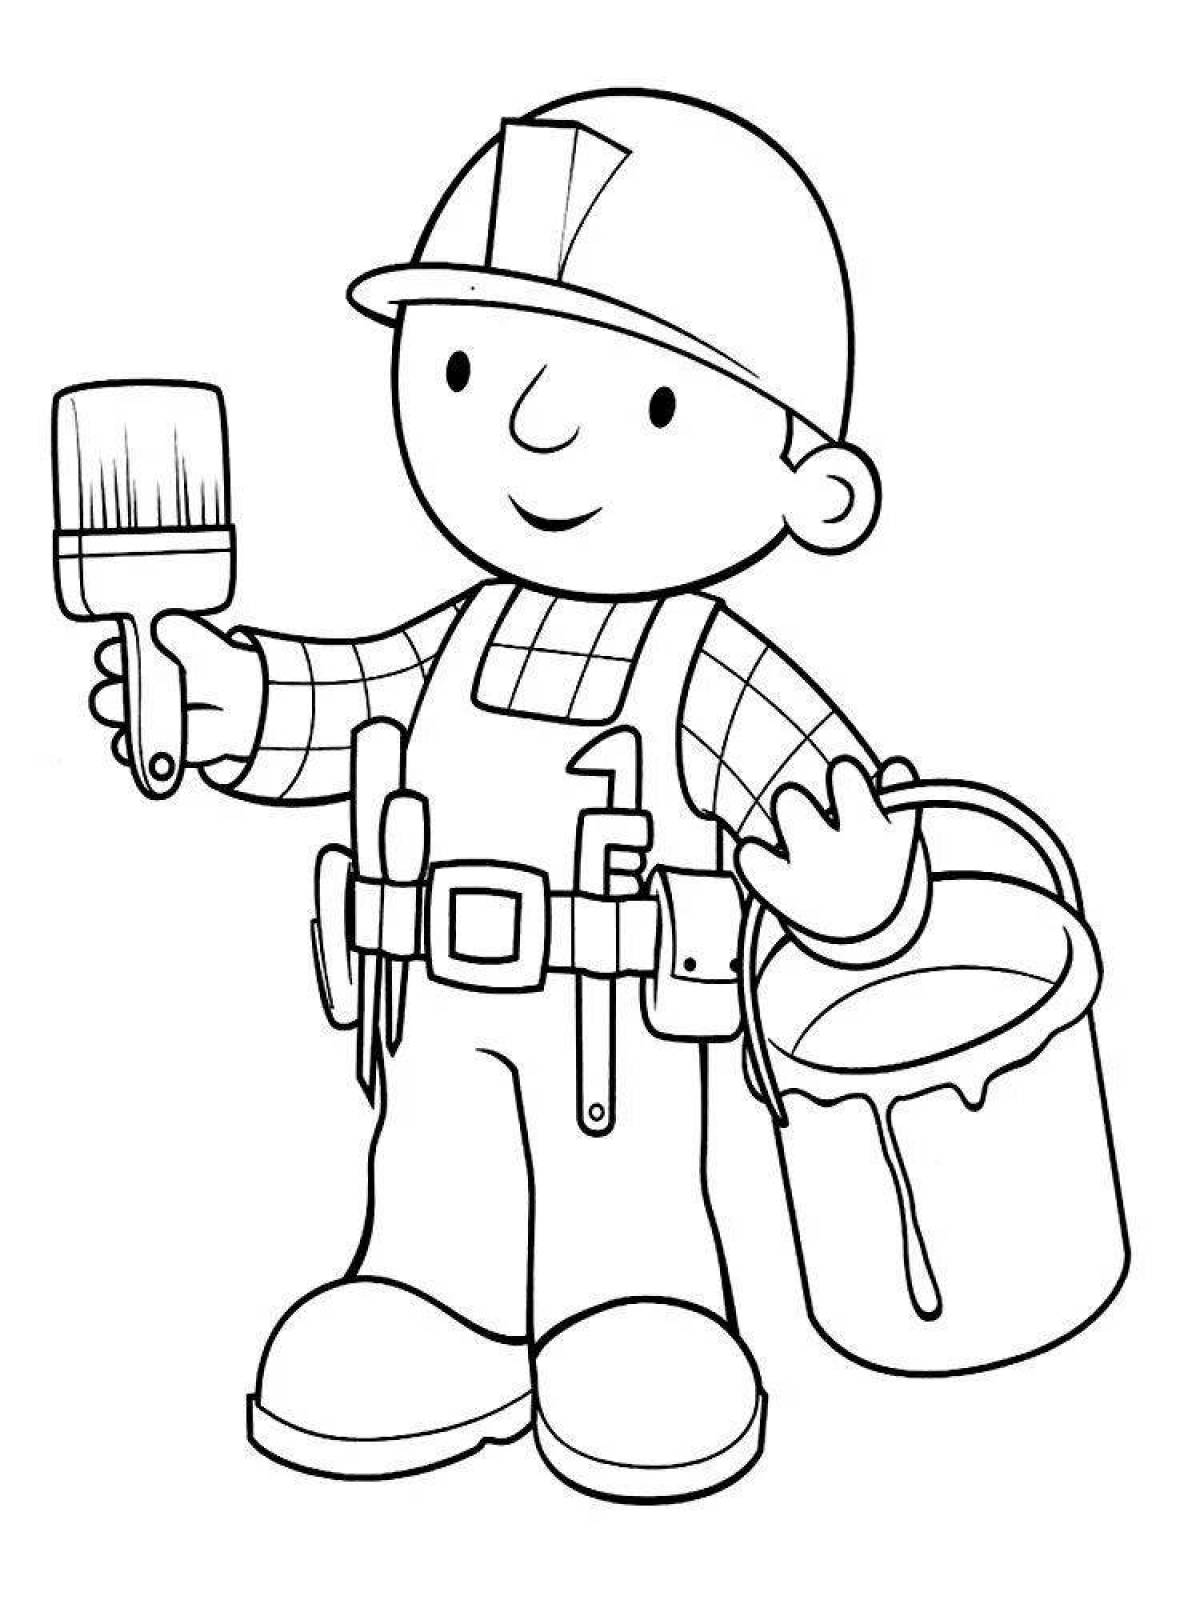 Colorful profession coloring book for preschoolers